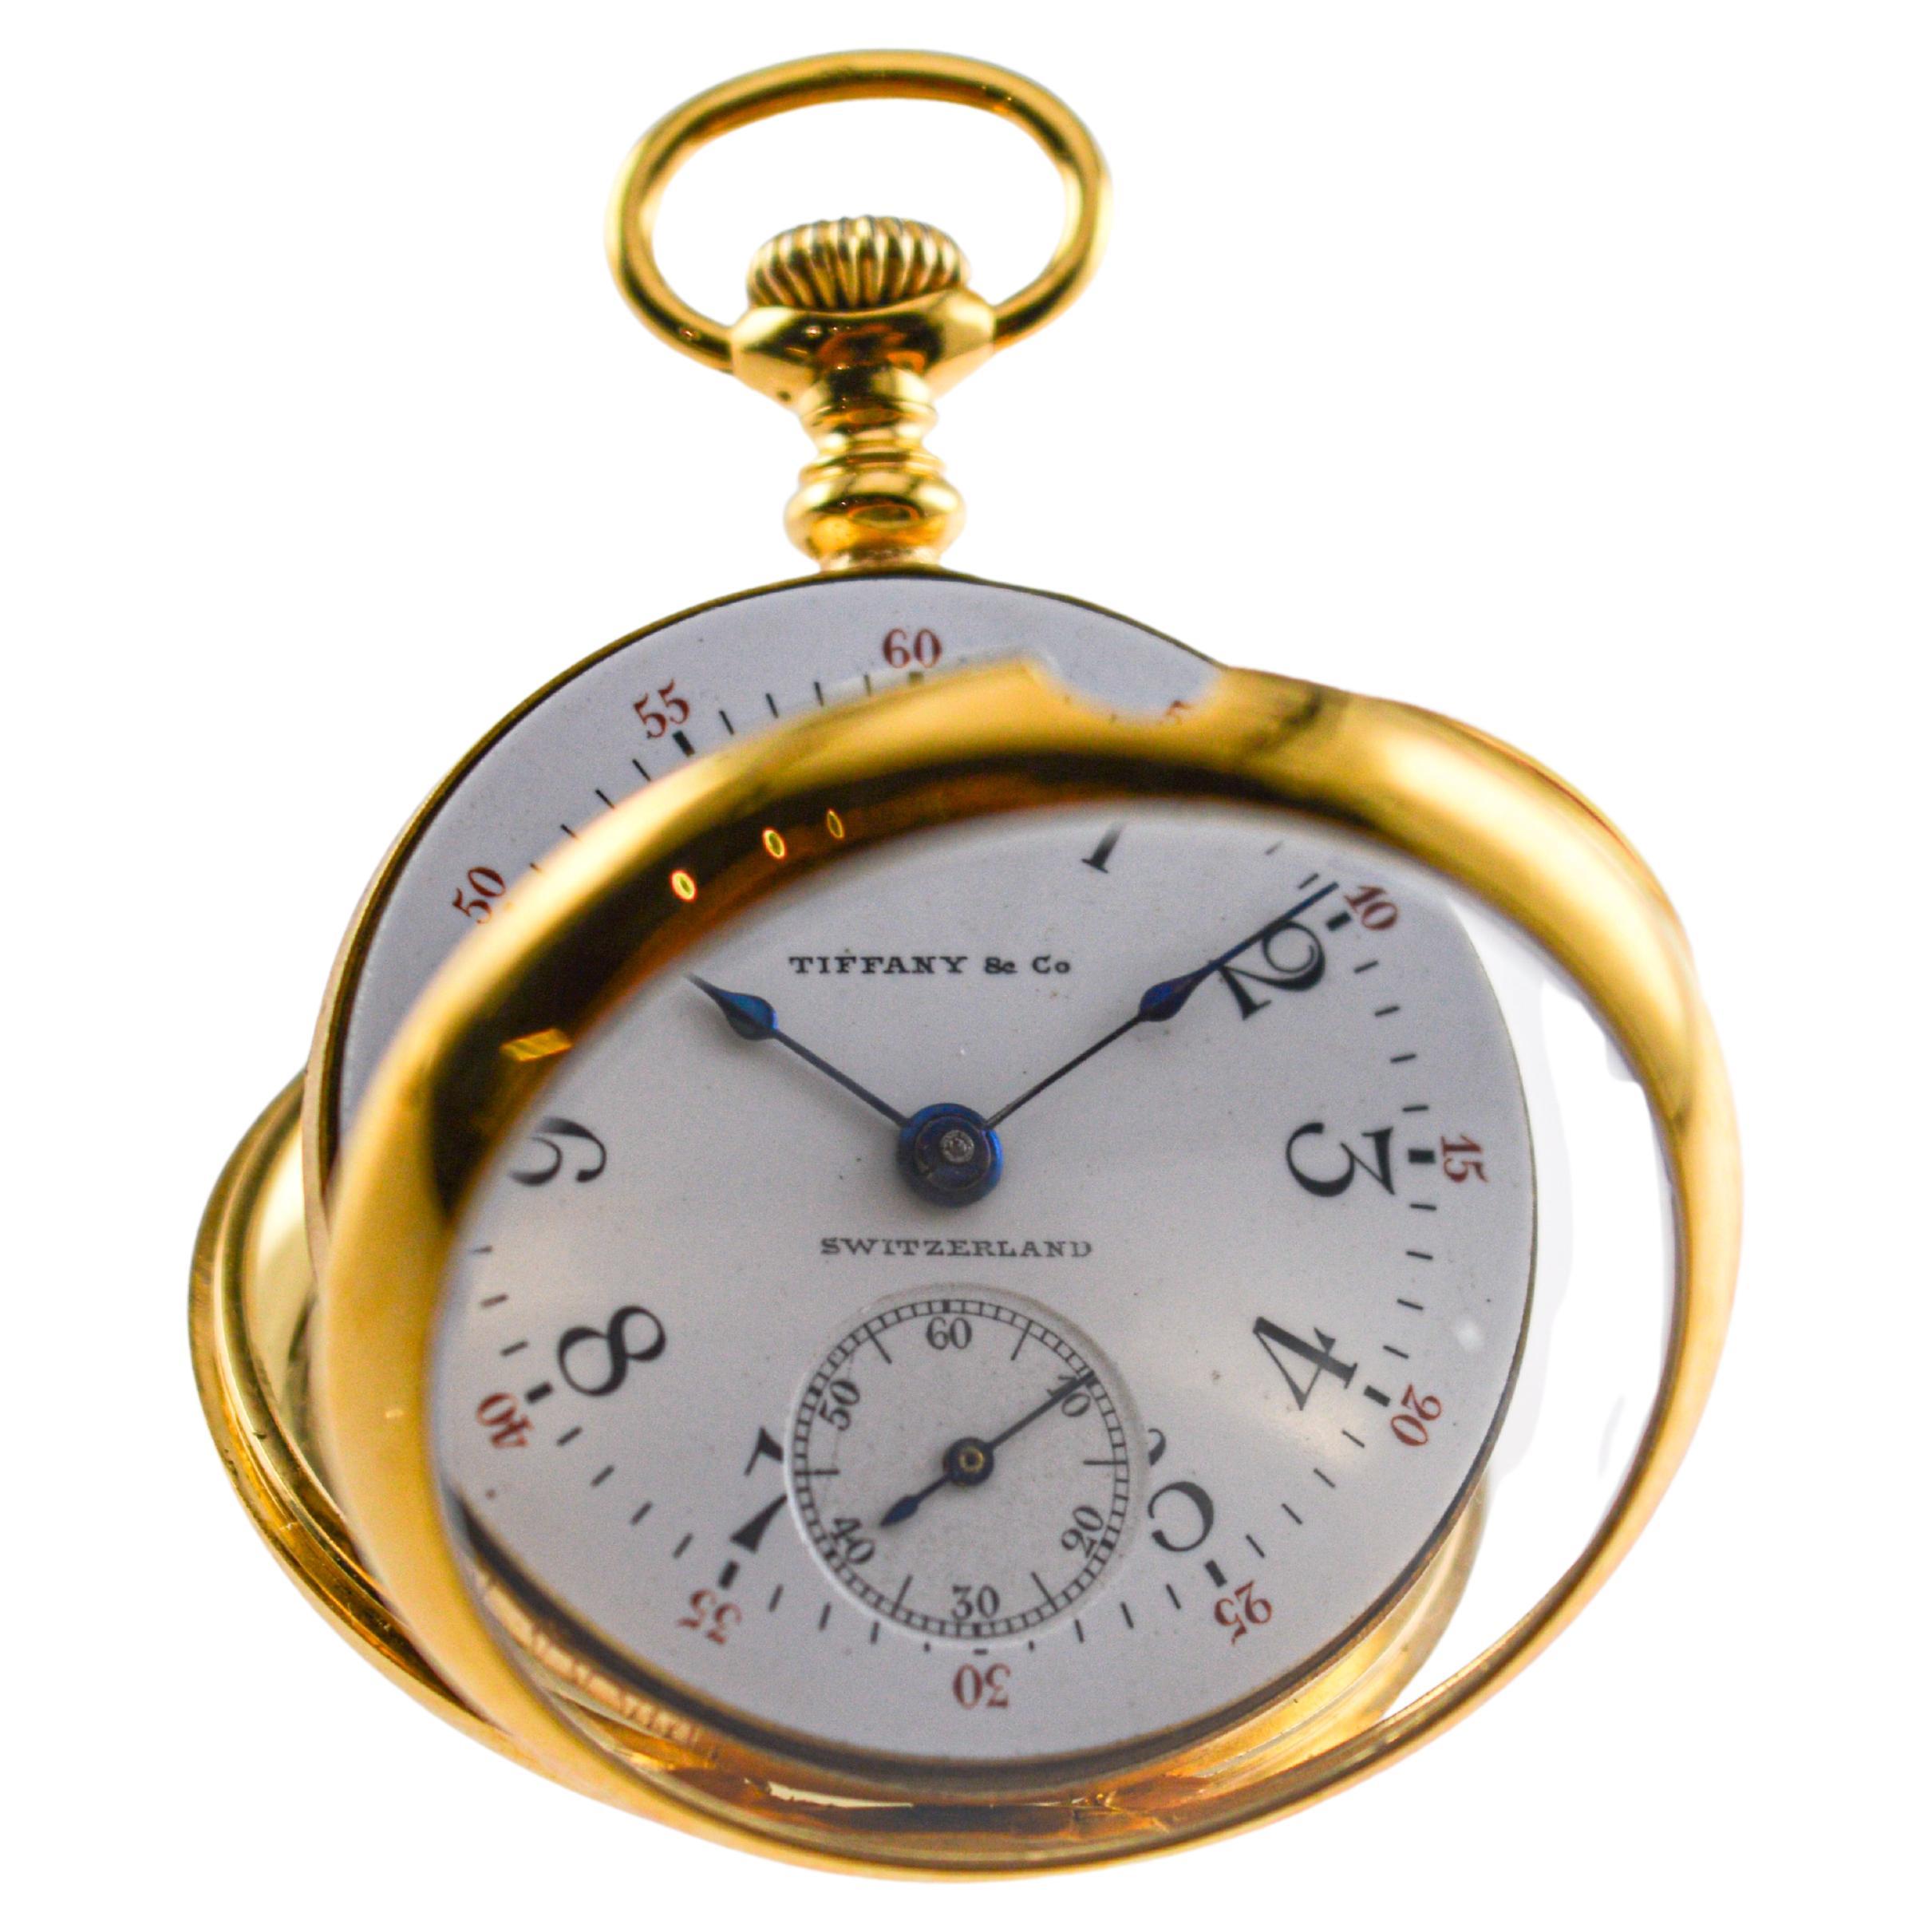 Tiffany & Co 18Kt Gold Pendant Watch with Gold Chain from 1912 Enamel Dial For Sale 2